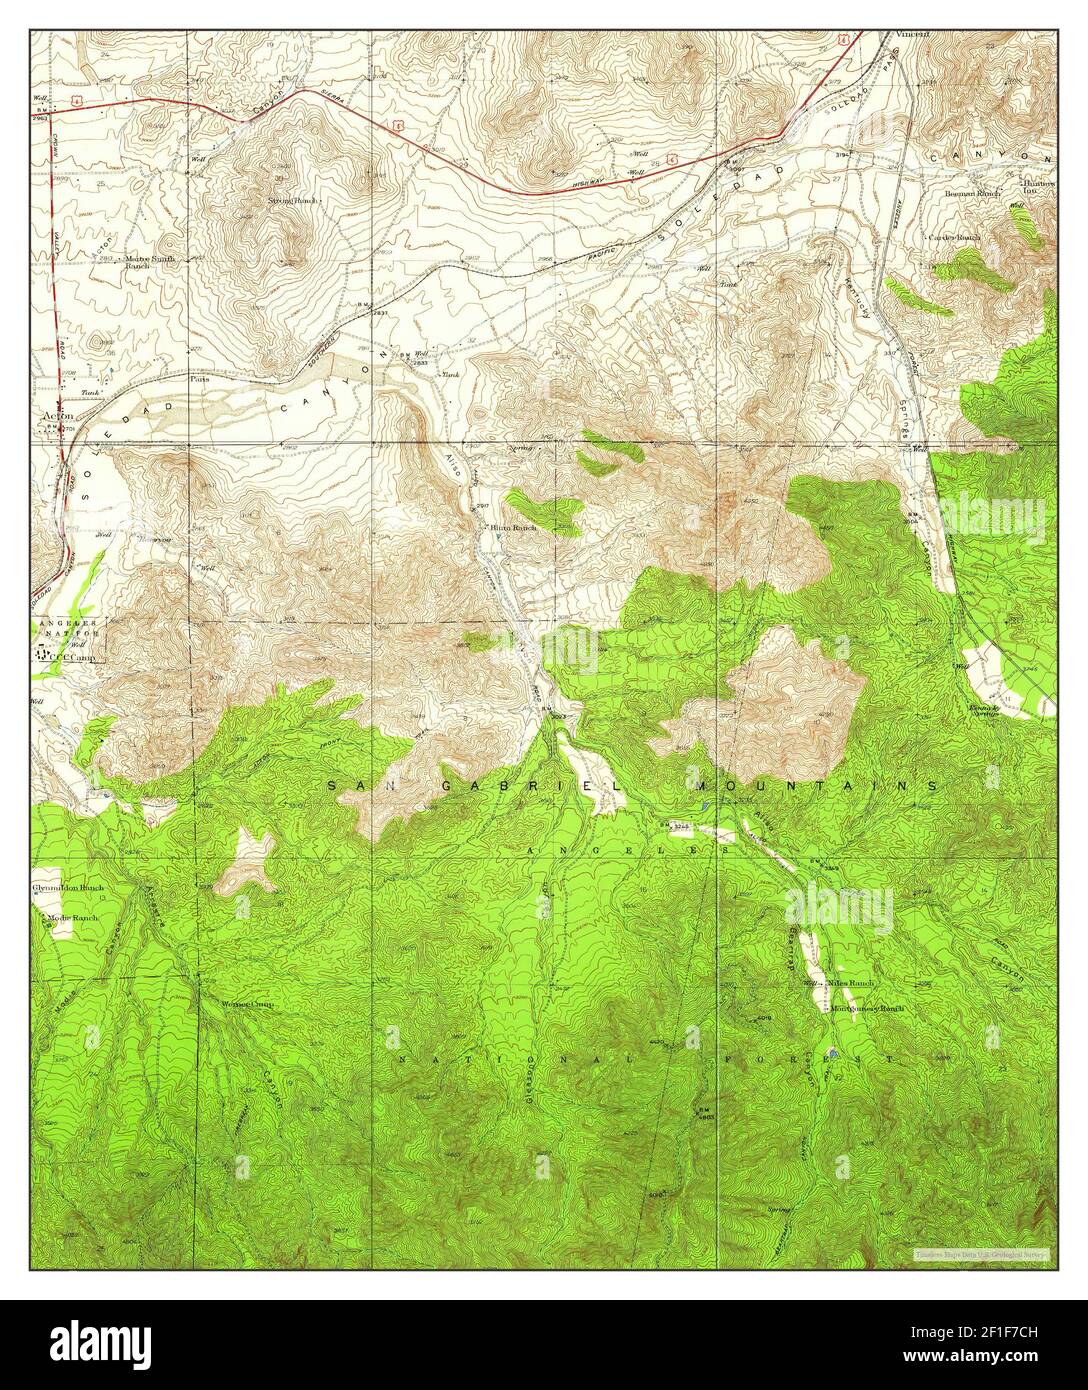 Acton, California, map 1939, 1:24000, United States of America by Timeless Maps, data U.S. Geological Survey Stock Photo